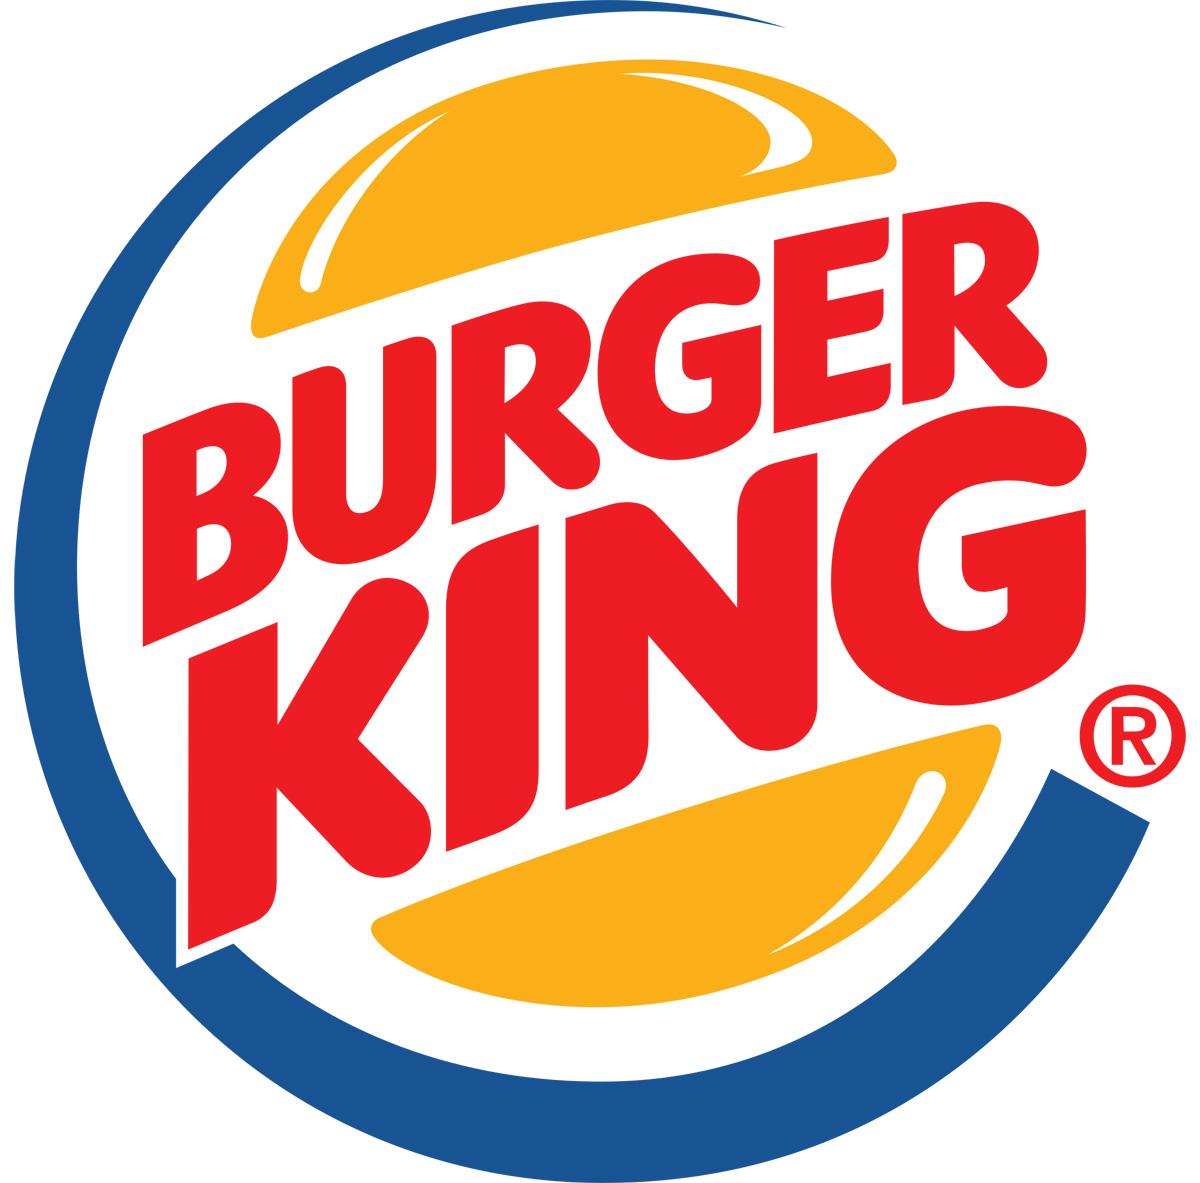 Free Burger King Cheeseburger with $1 Purchase